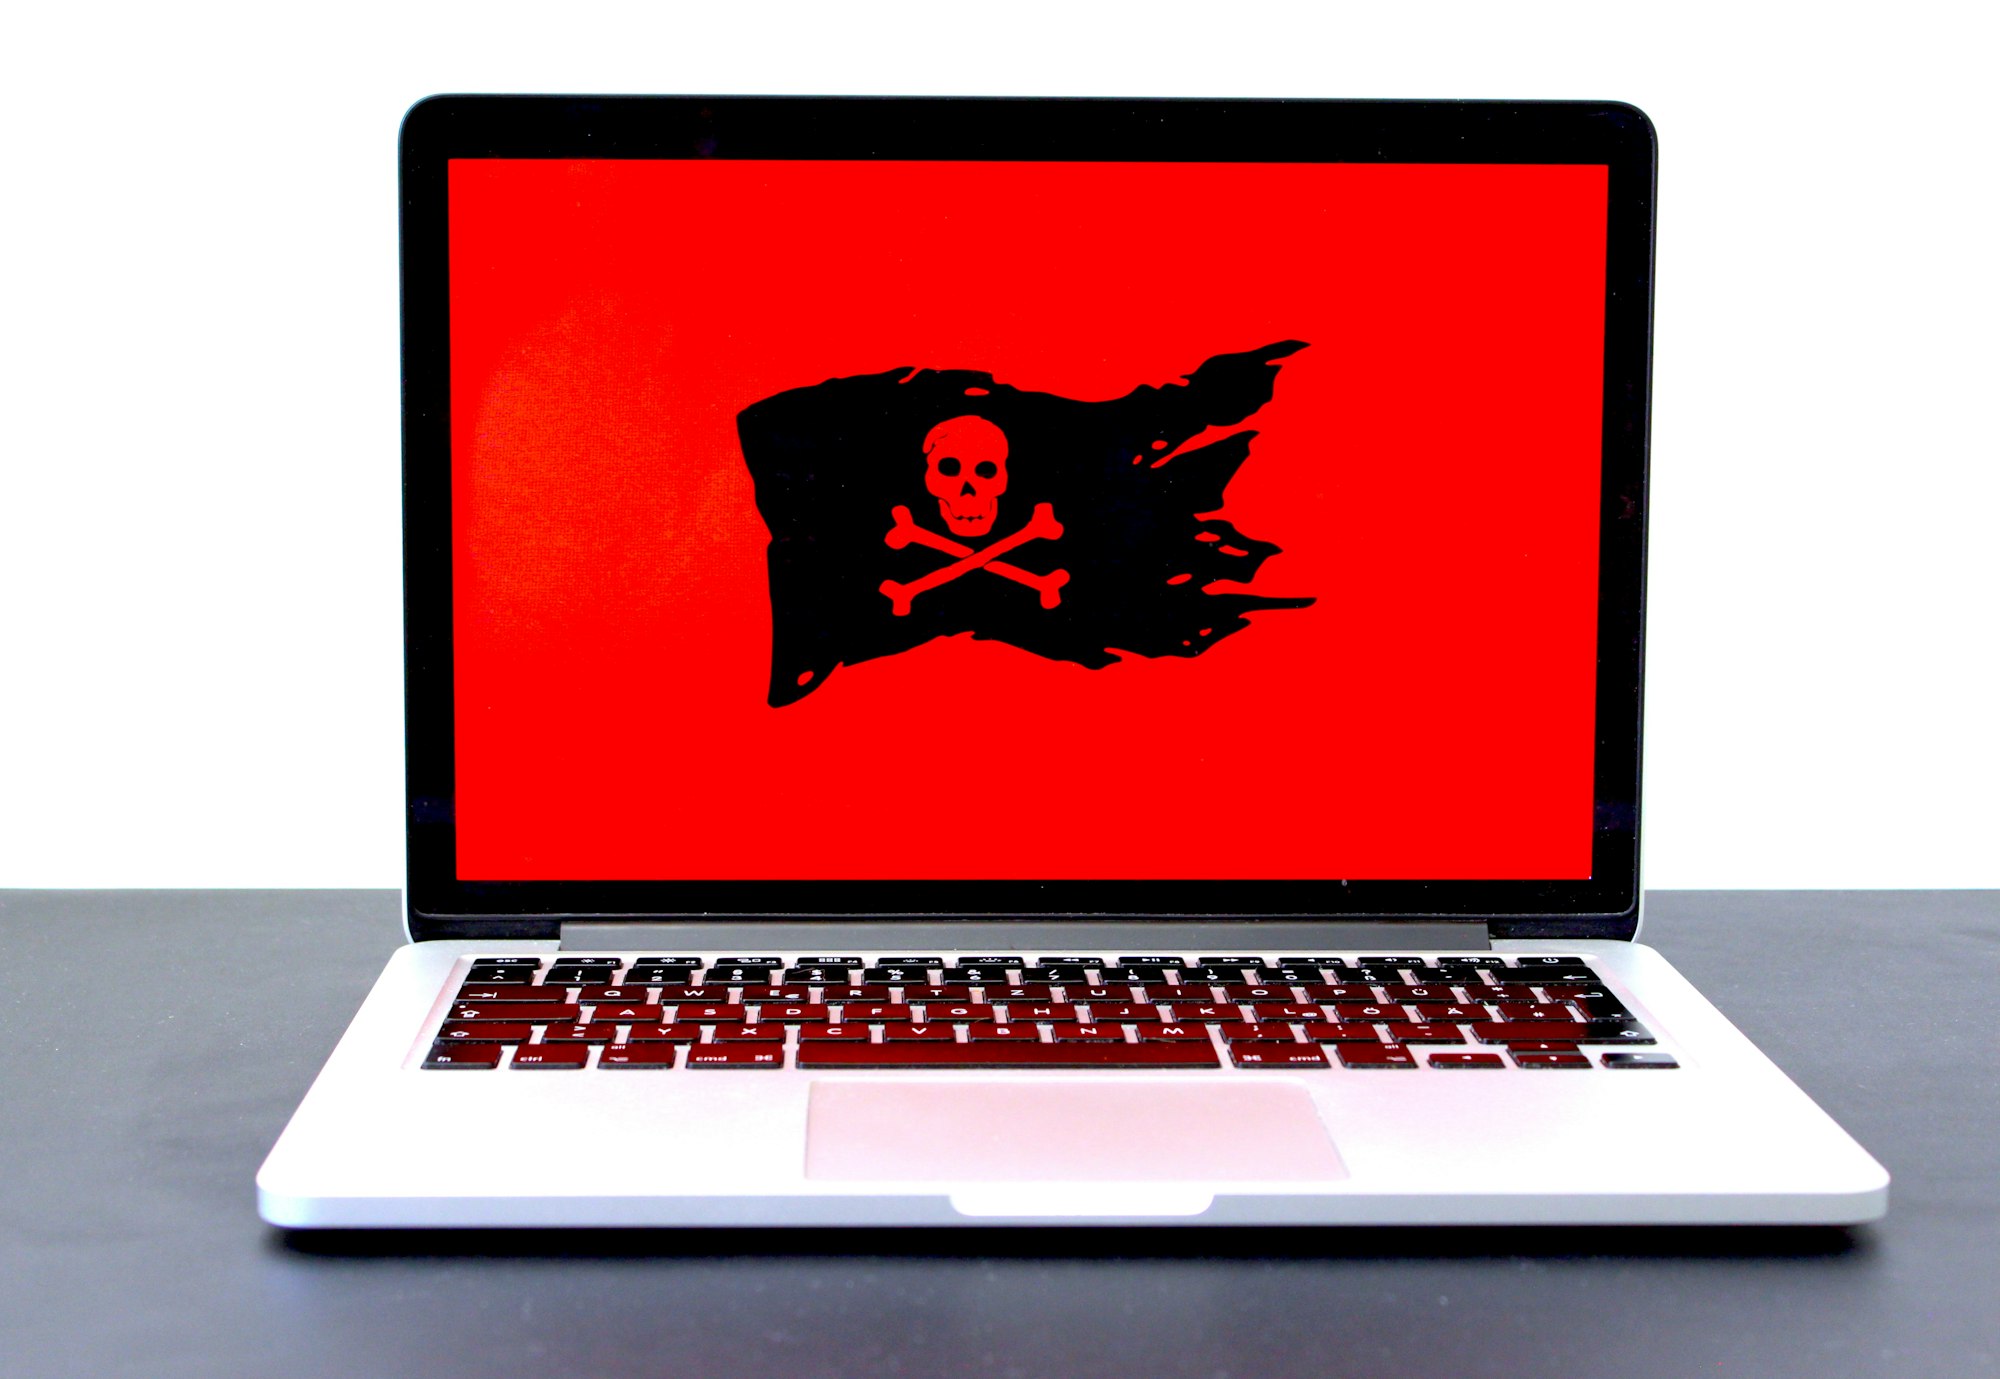 Laptop displaying a pirate flag / jolly roger on a red screen, possibly indicating malware, hackers or a different computer problem. If you like that image, consider donating at https://sharethemeal.org/donate - thanks!